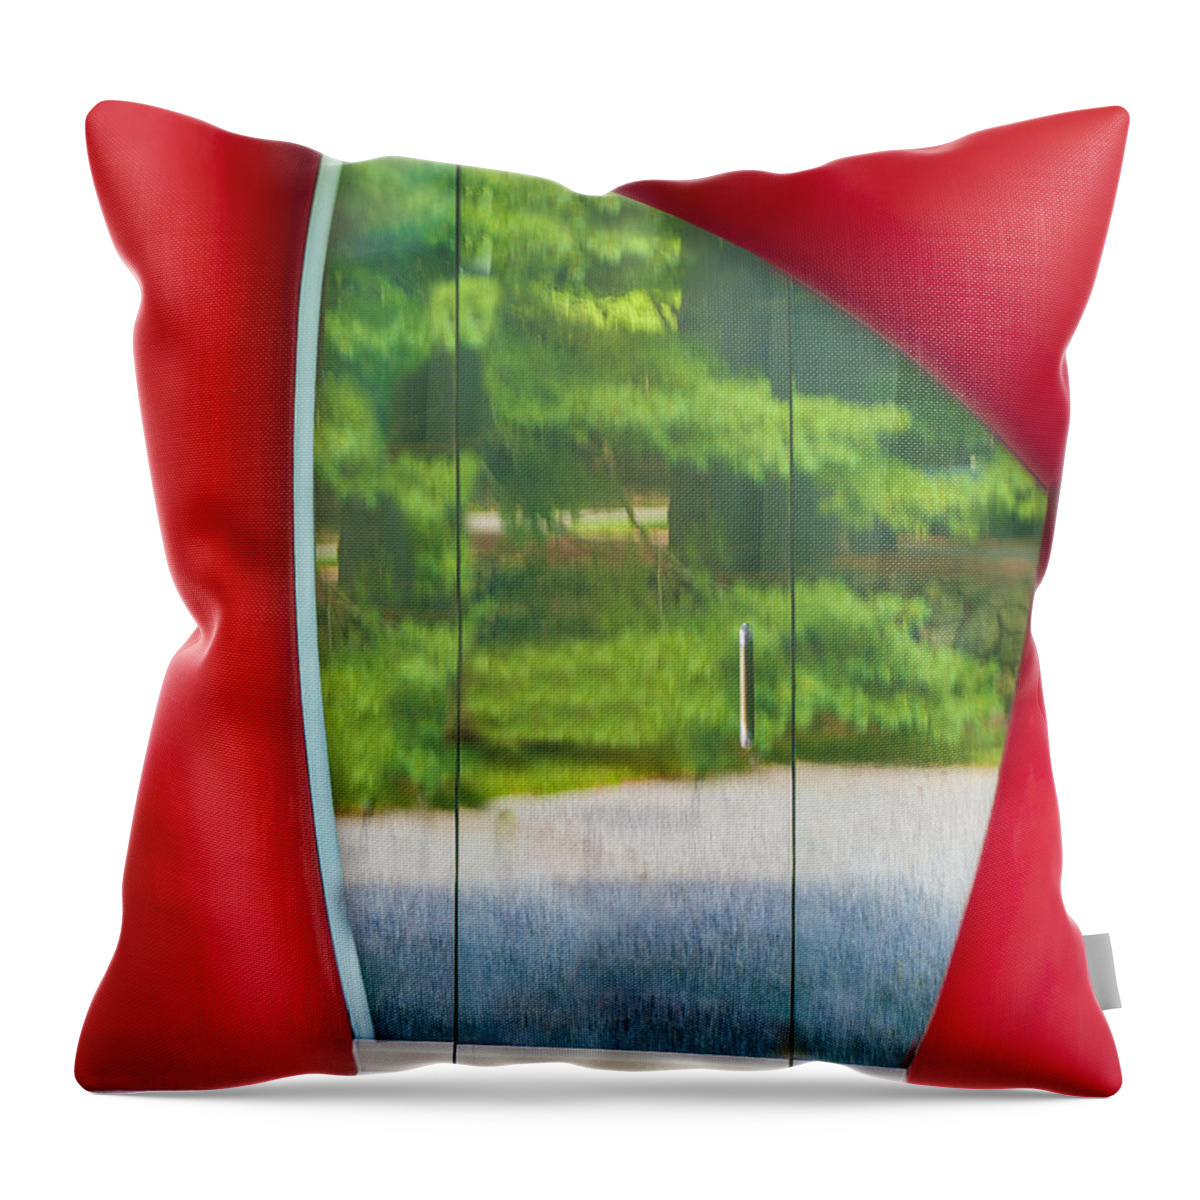 Glass House Throw Pillow featuring the photograph On The Outside Looking Out by Paul Wear